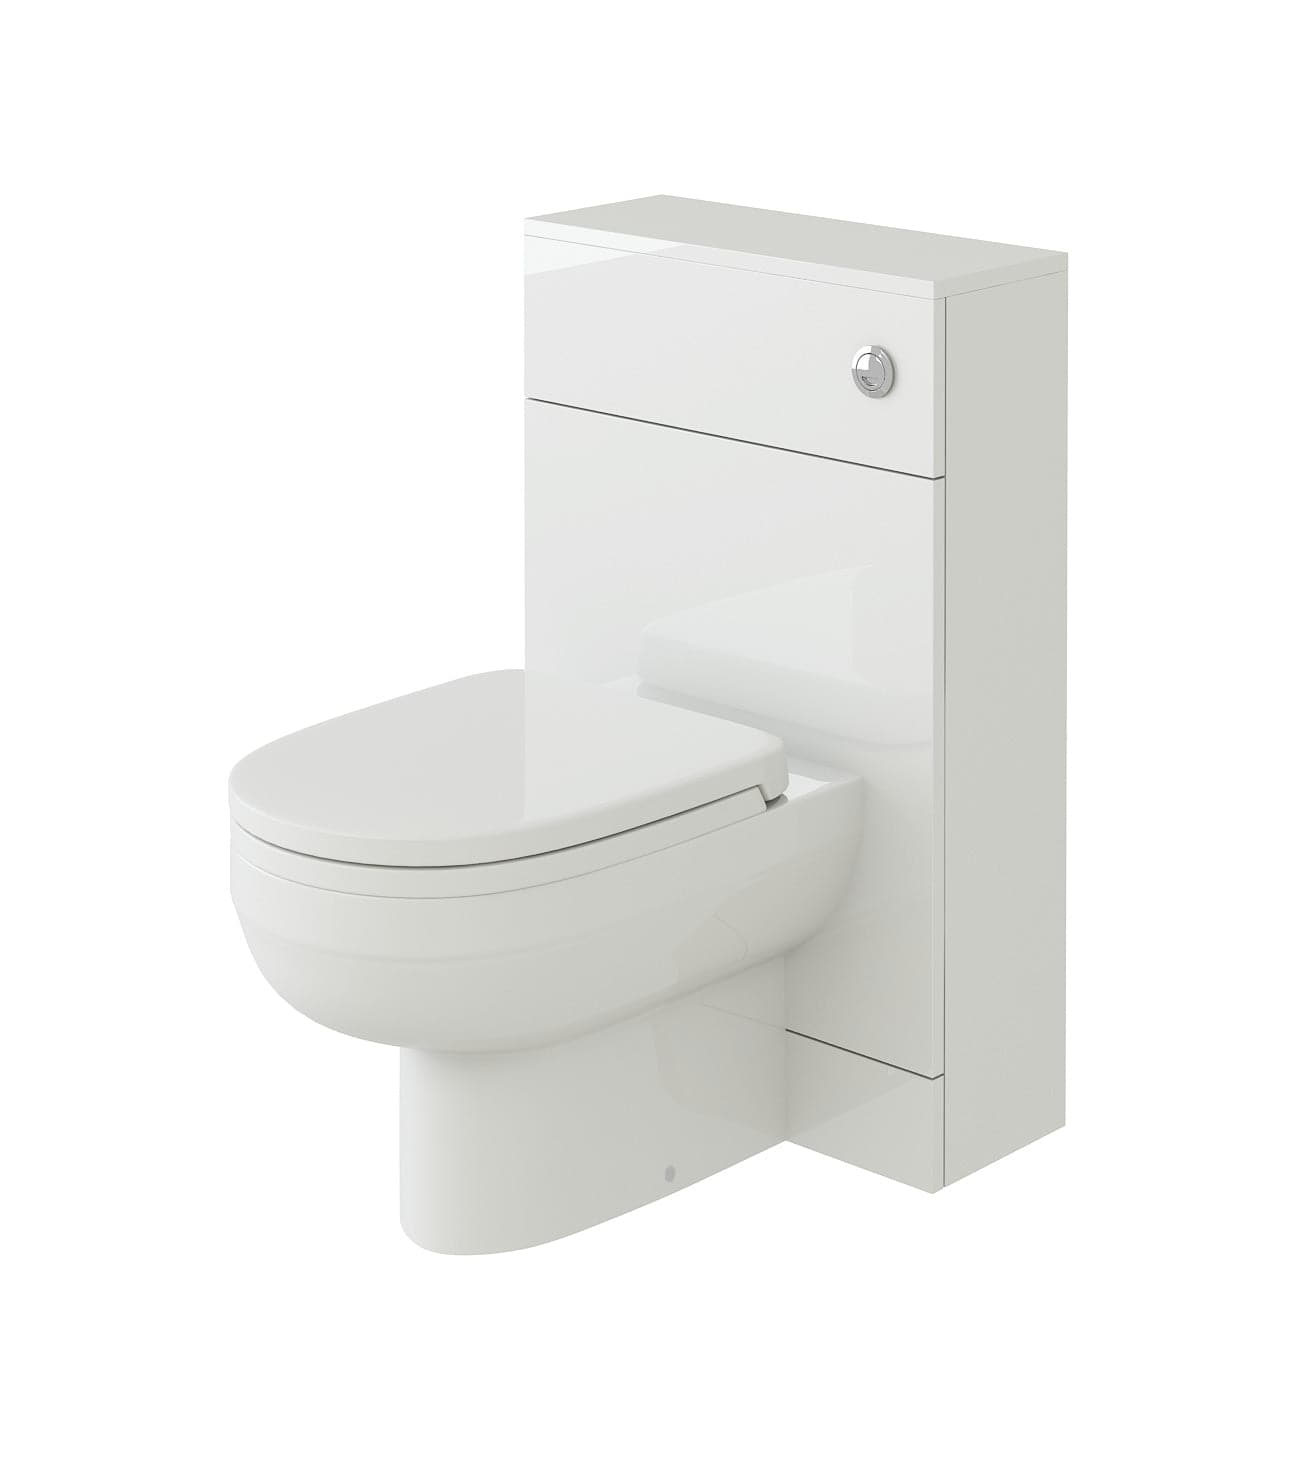 Modern White Close Coupled Toilet with Cistern Soft Close Seat Bathroom WC (SLK630) - Buy now for stylish home upgrades!